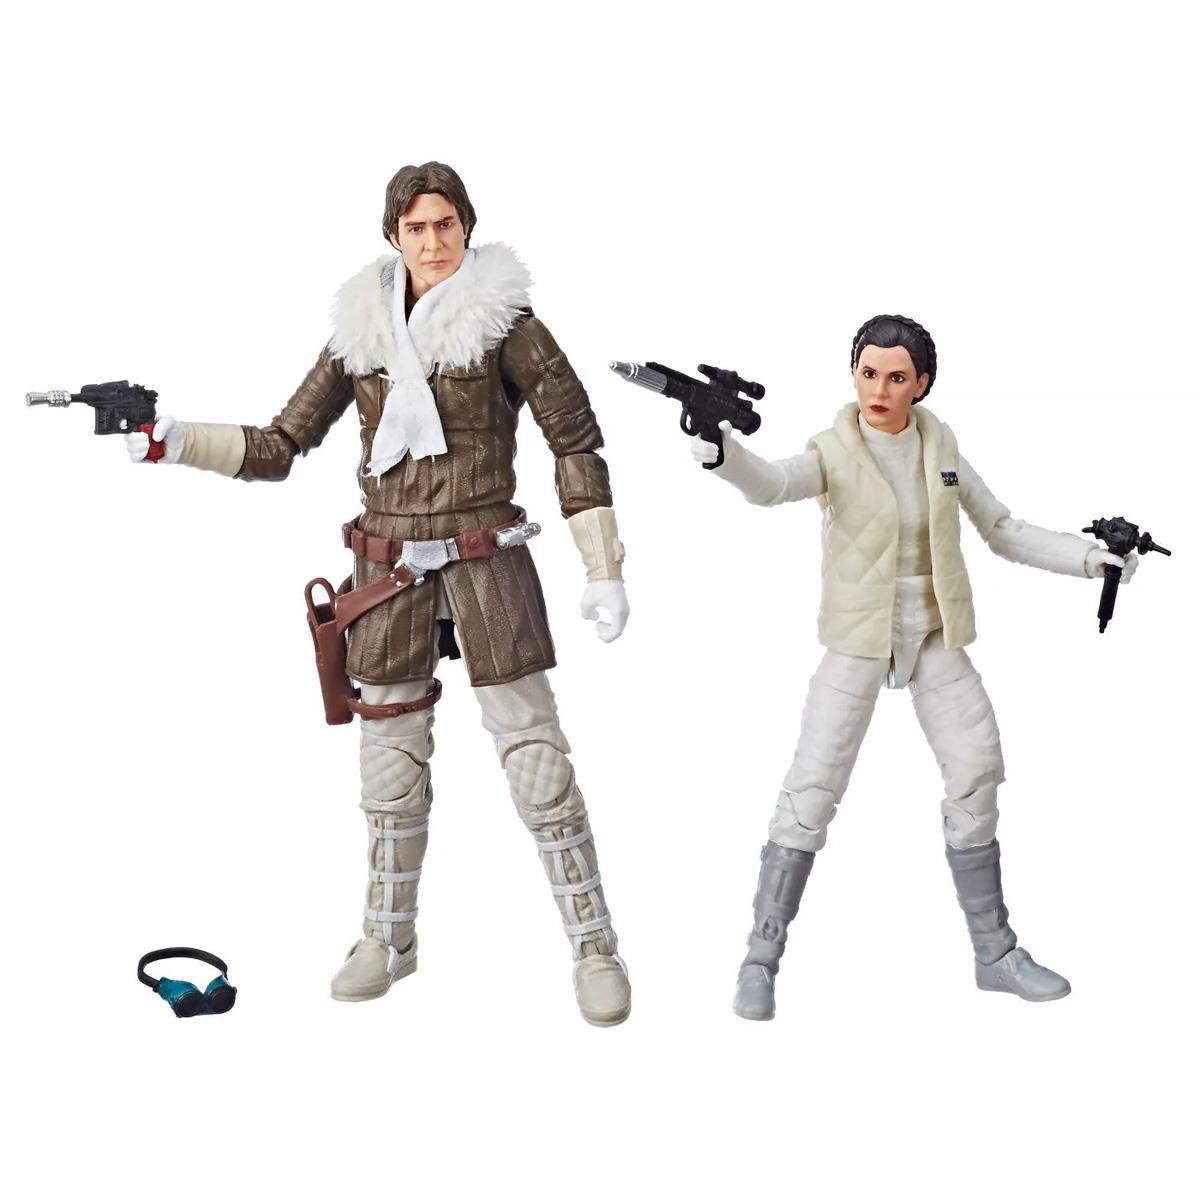 Star Wars The Black Series Han Solo and Leia Figure Set for $24.99